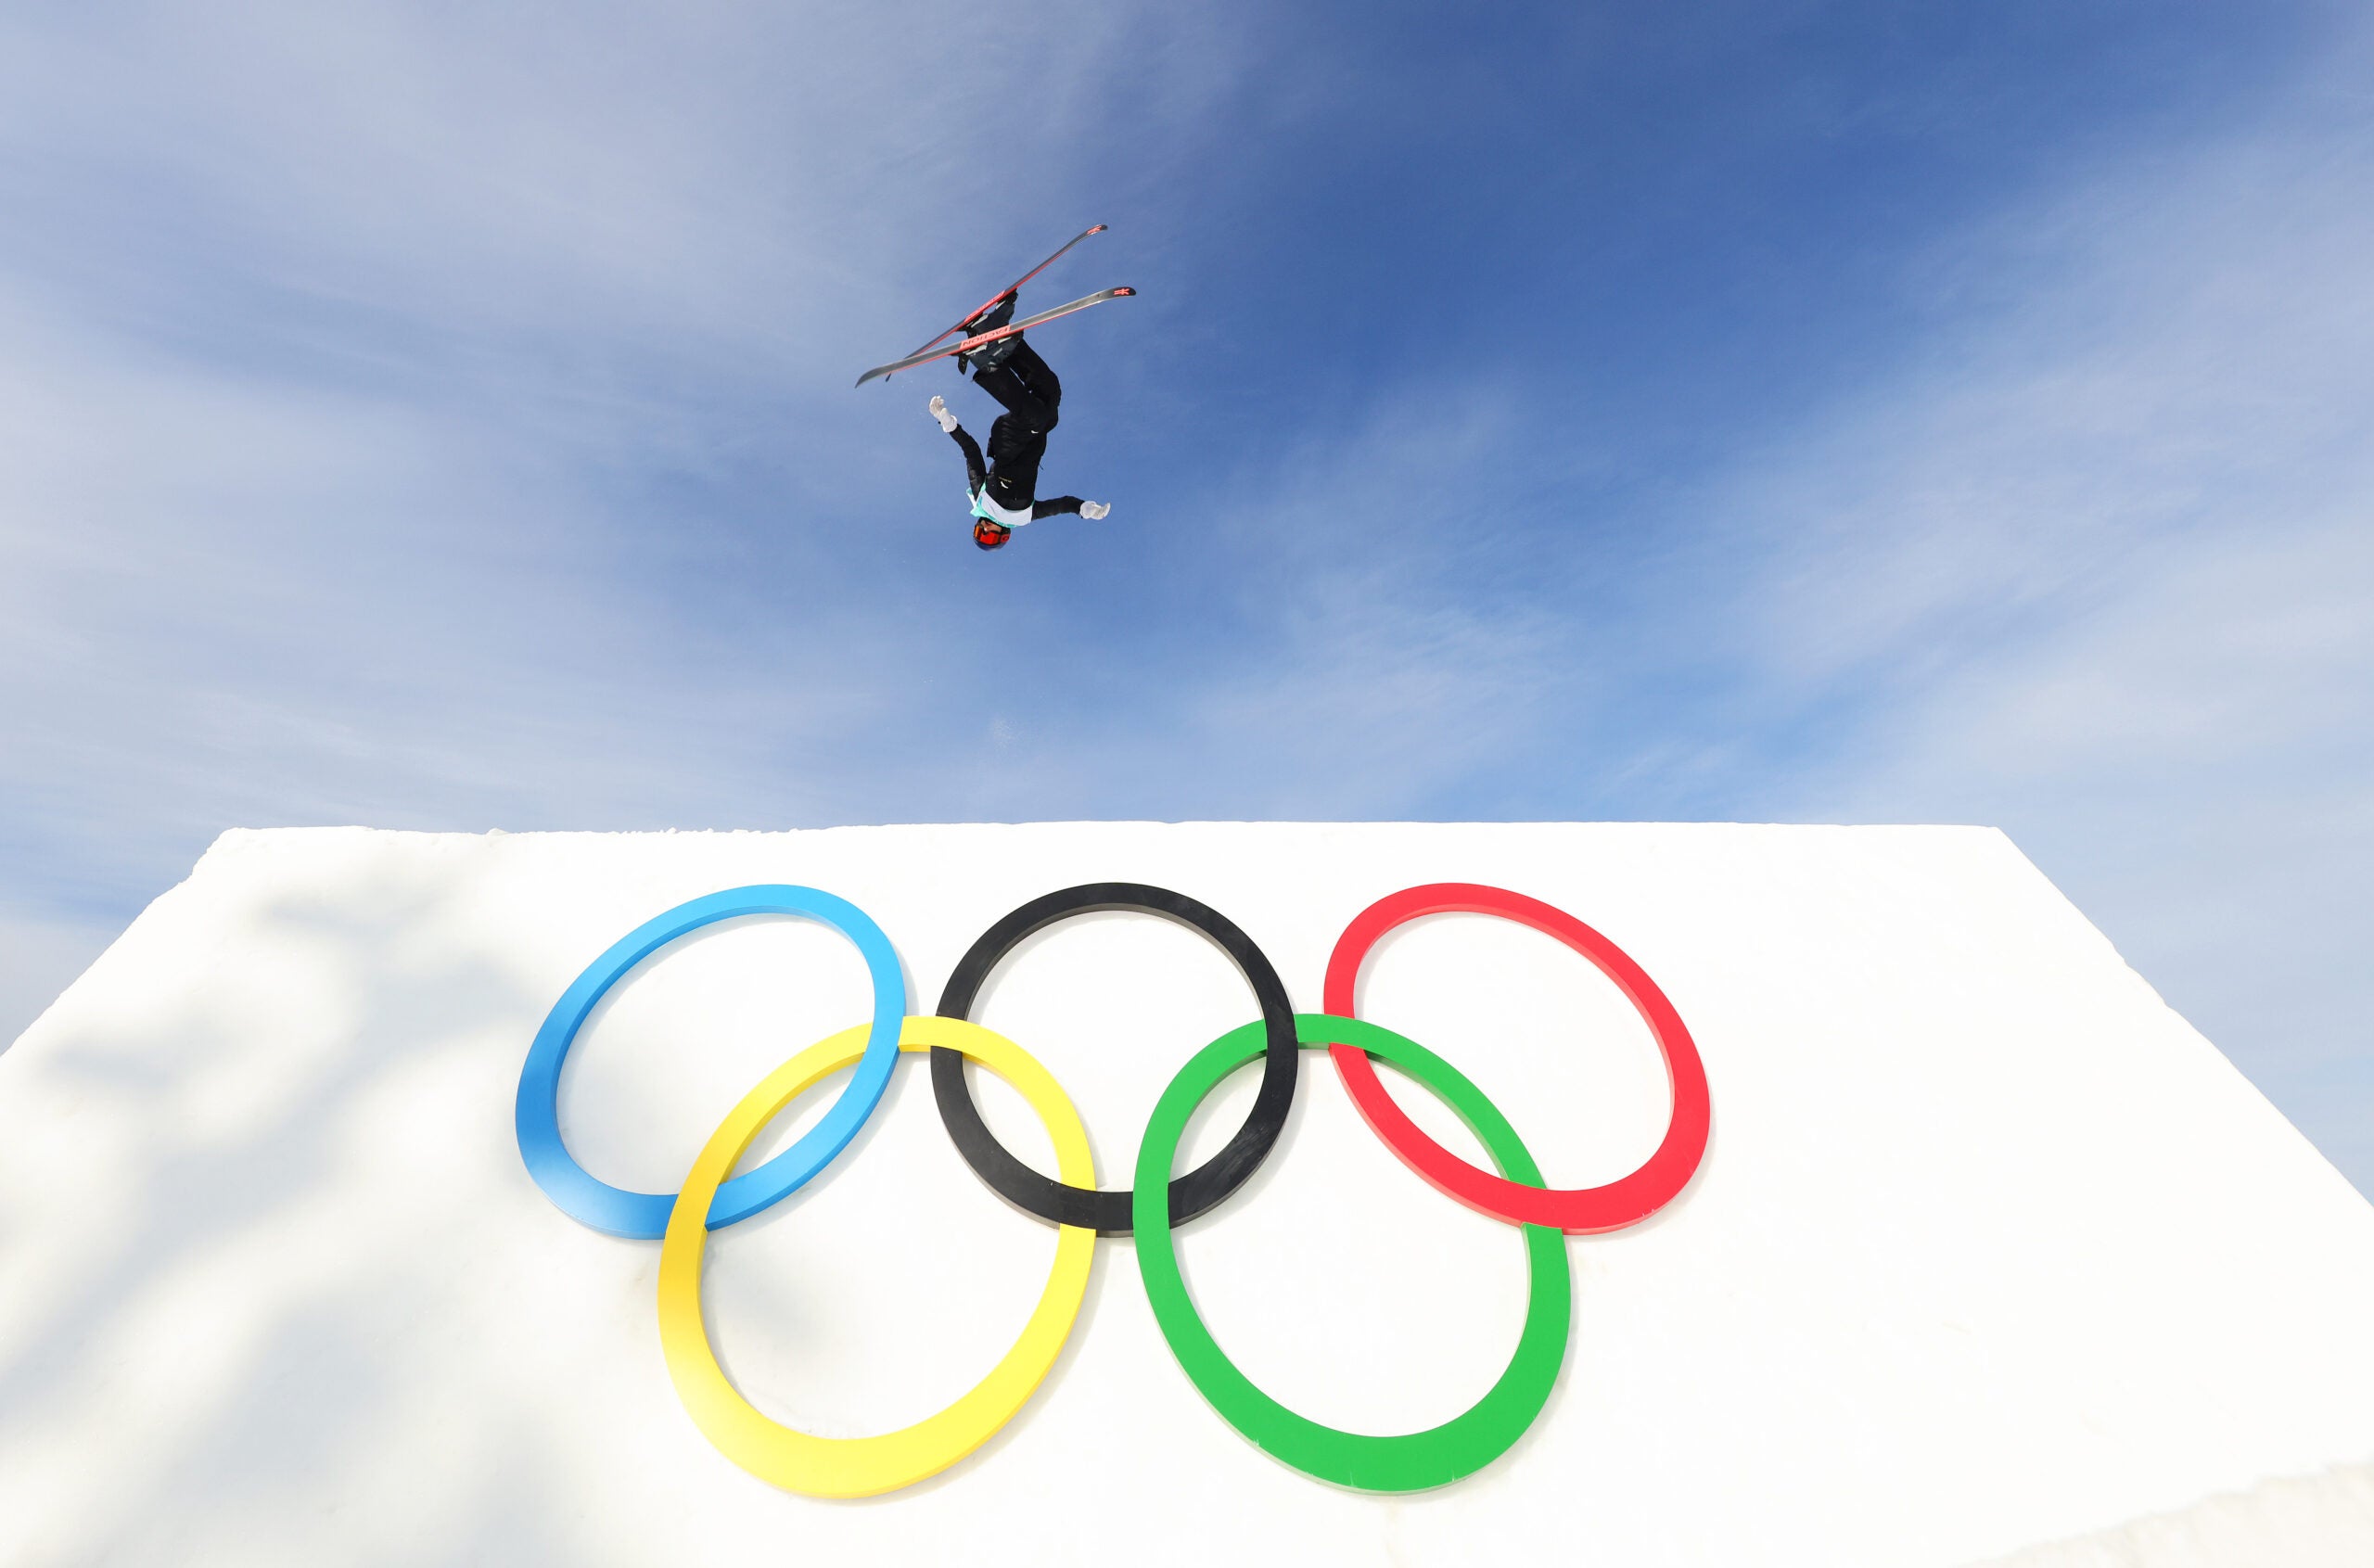 Who Is Eileen Gu? The American-Born Freestyle Skier Is Competing For China